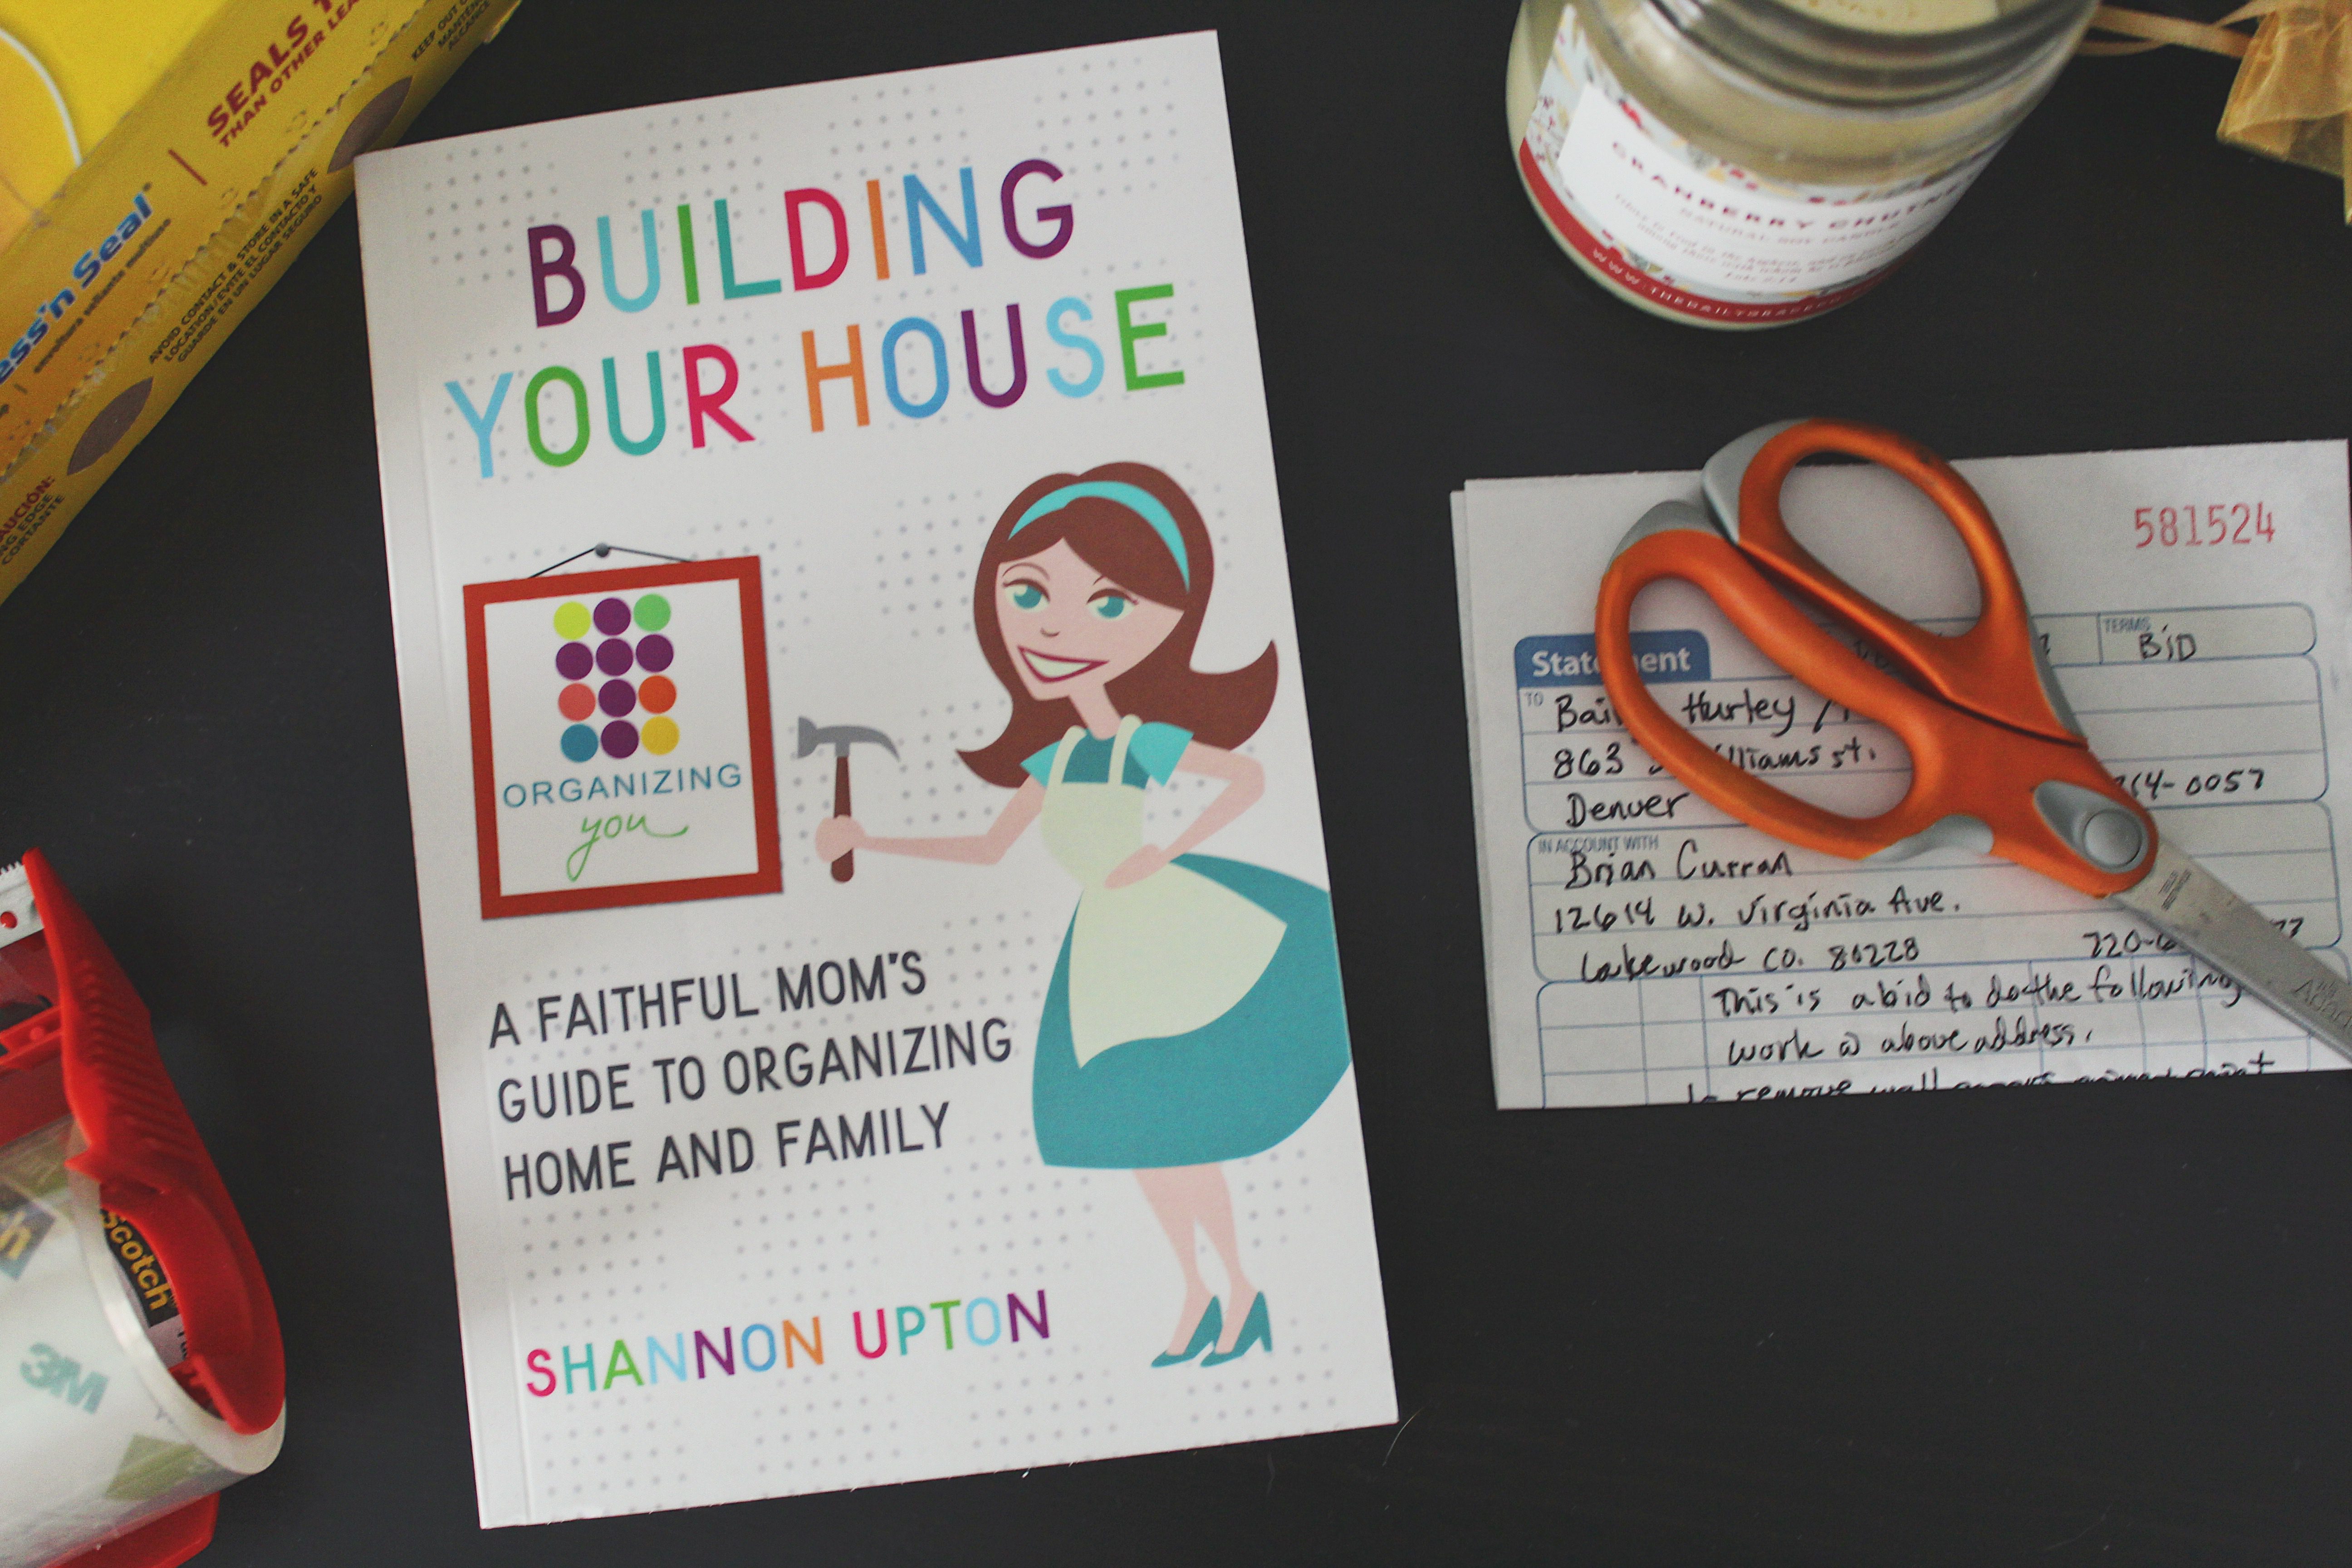 Books that Build Relationships: Building Your House